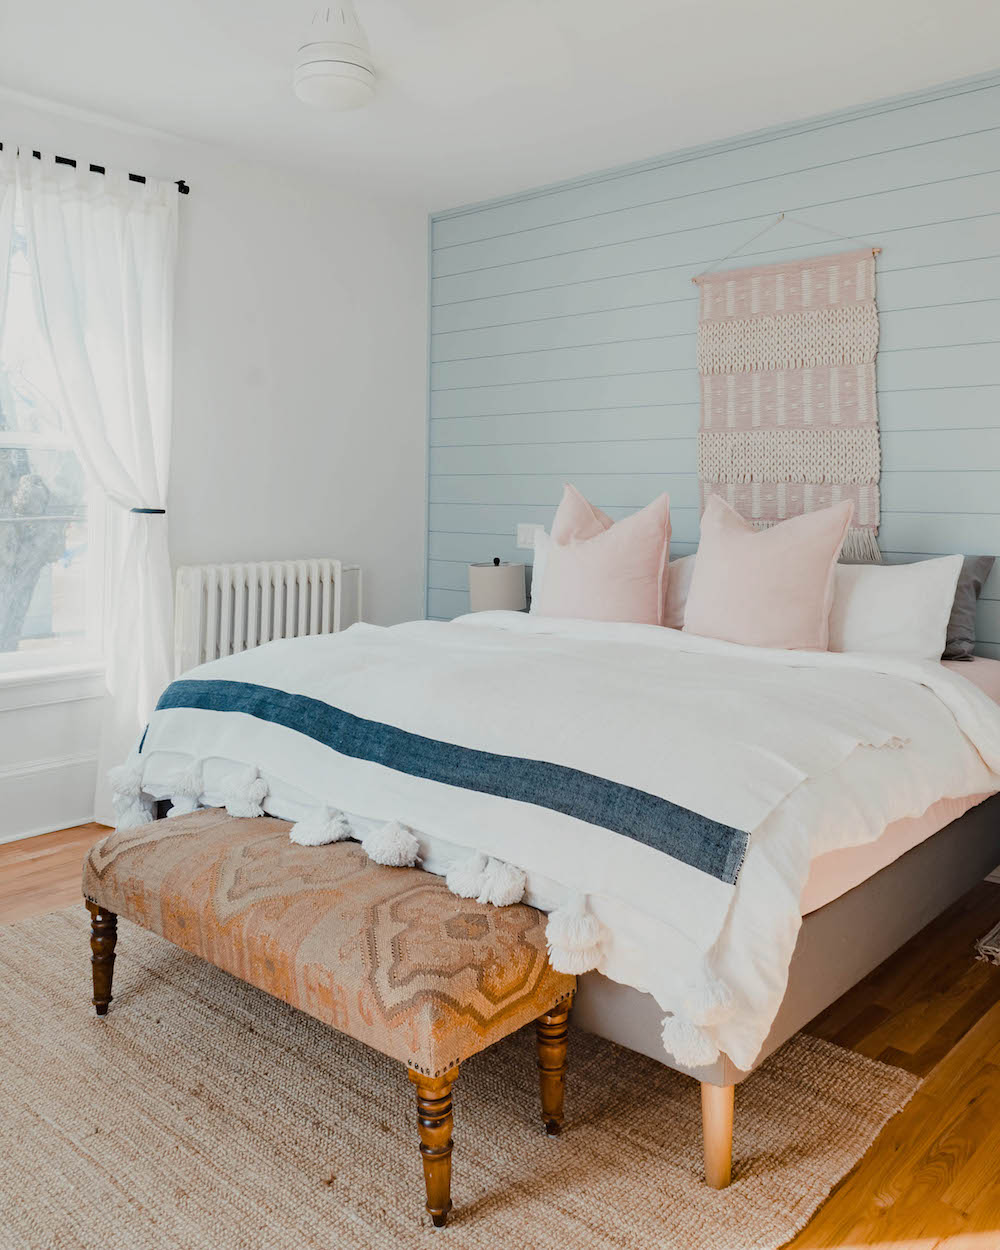 Ivy House Inn tour pastel bedroom with shiplap walls